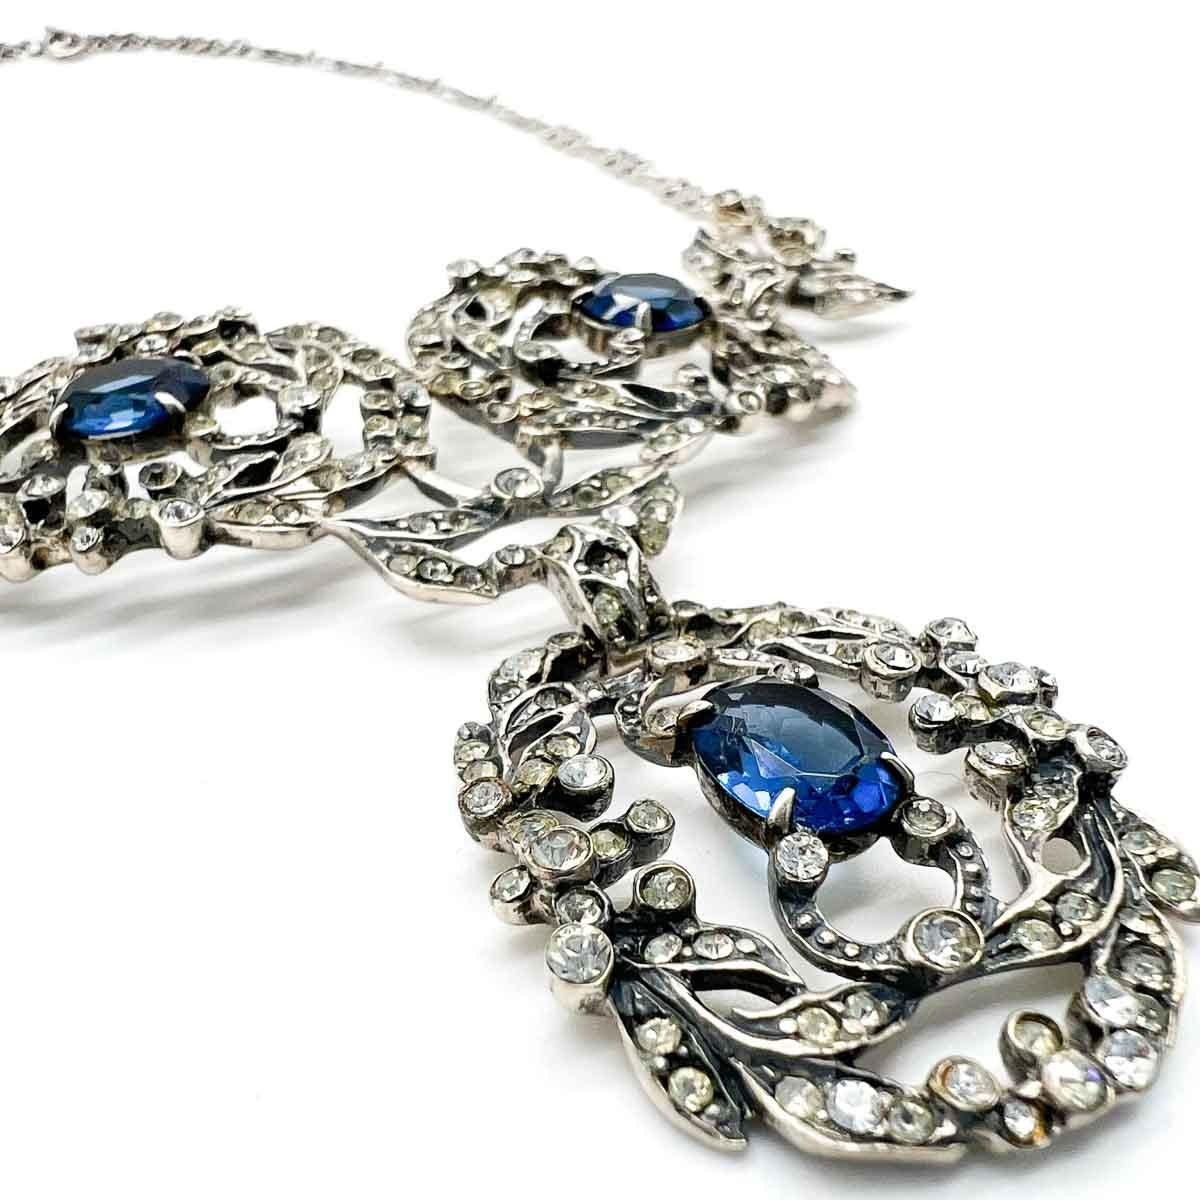 A Sterling Silver Vintage Castlecliff Sapphire Paste Necklace inspired by Renaissance jewellery styles. The delicate sterling silver scroll and leaf motif setting making the perfect backdrop for the tiny clear chaton pastes and trio of deep sapphire